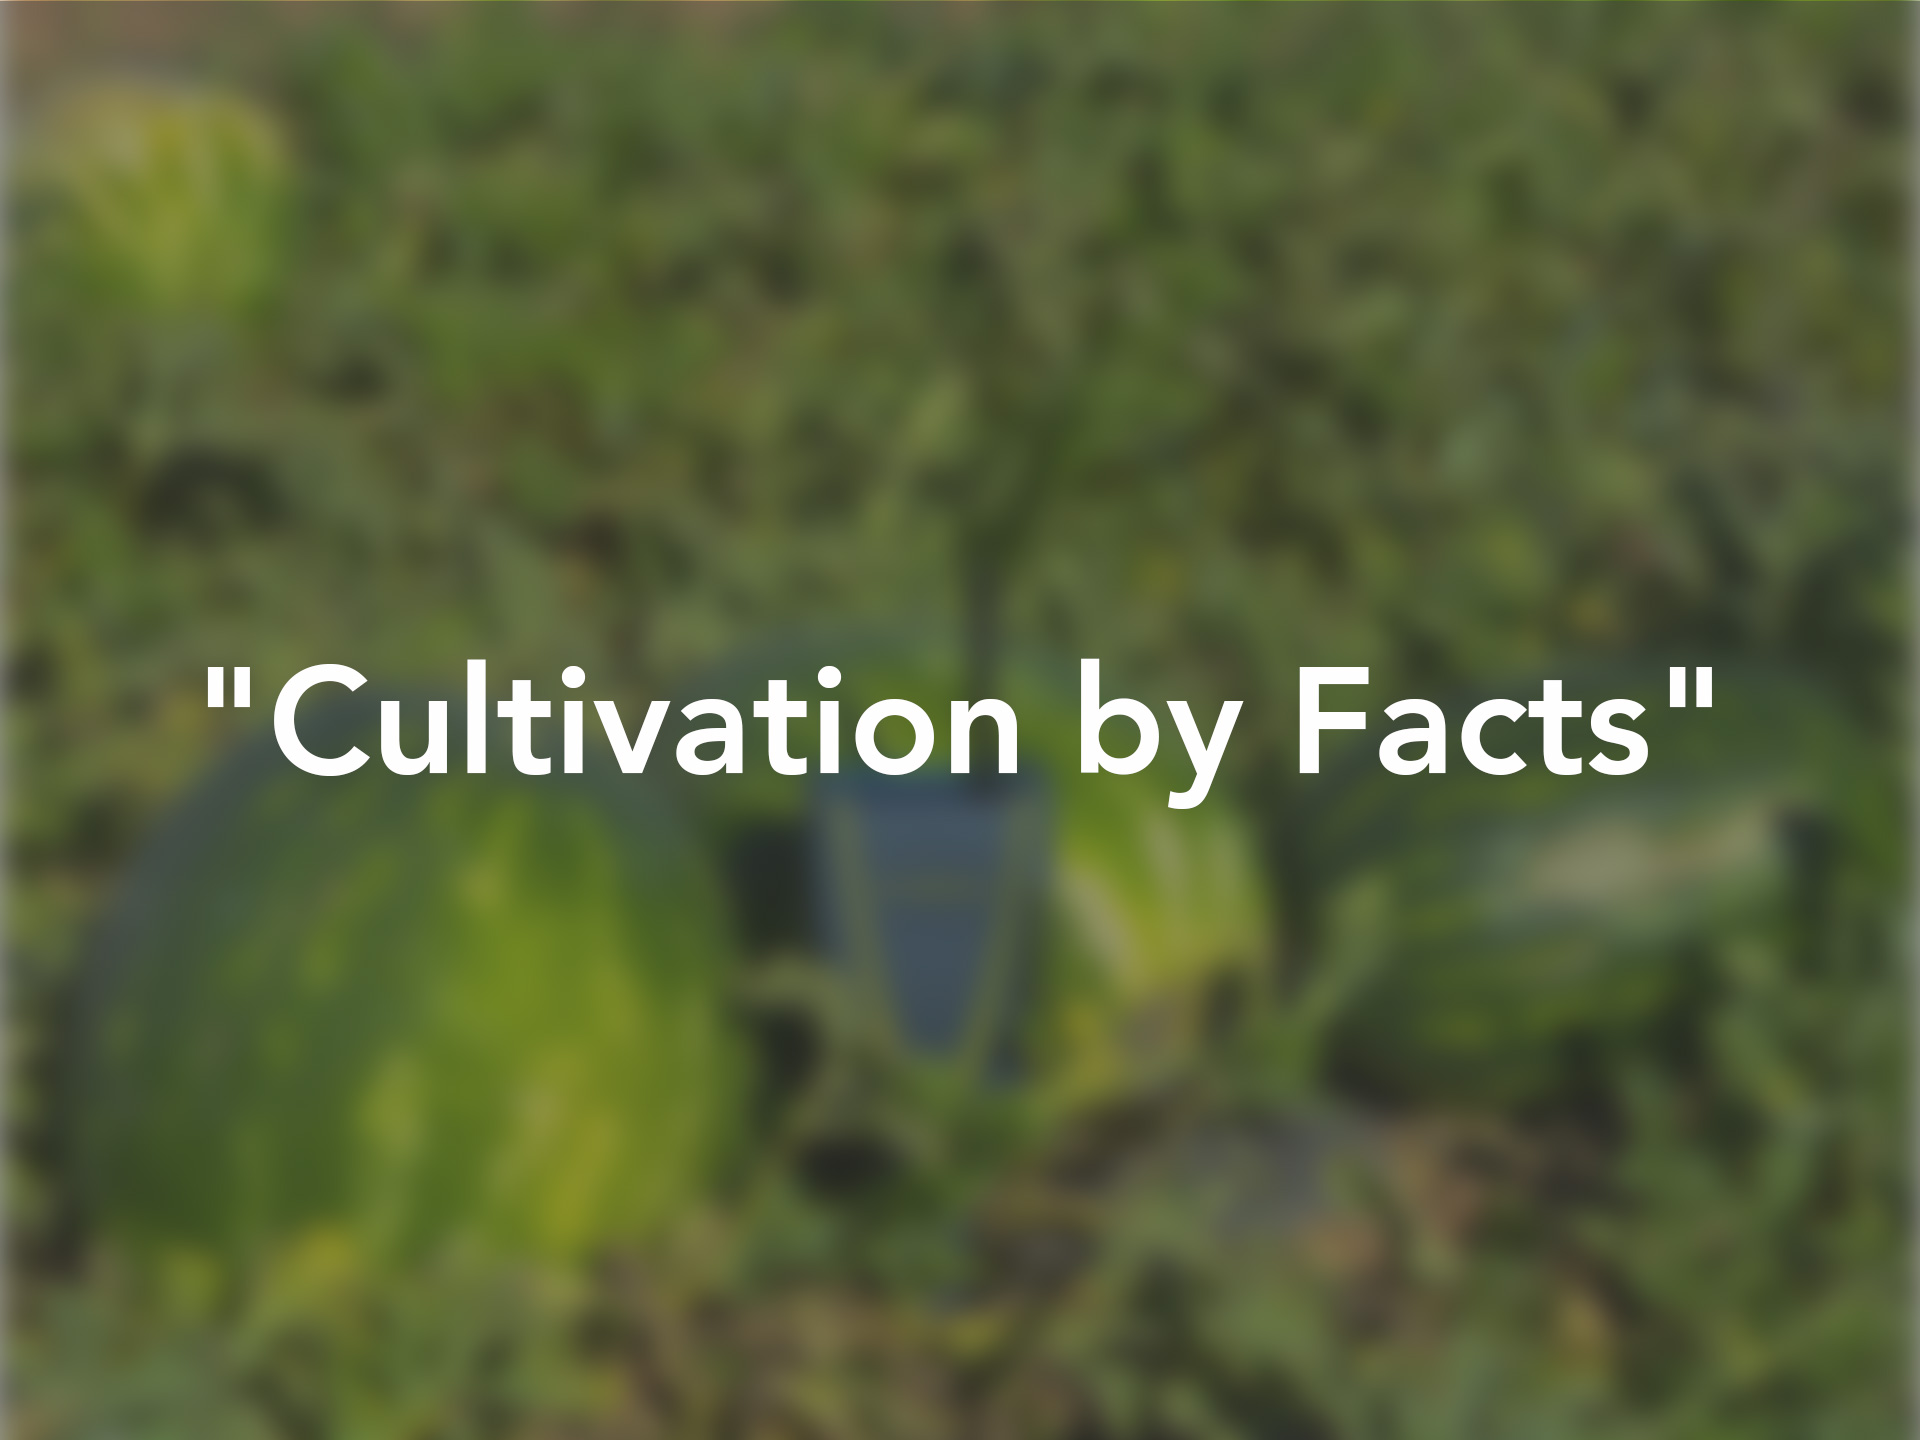 Cultivation by Facts